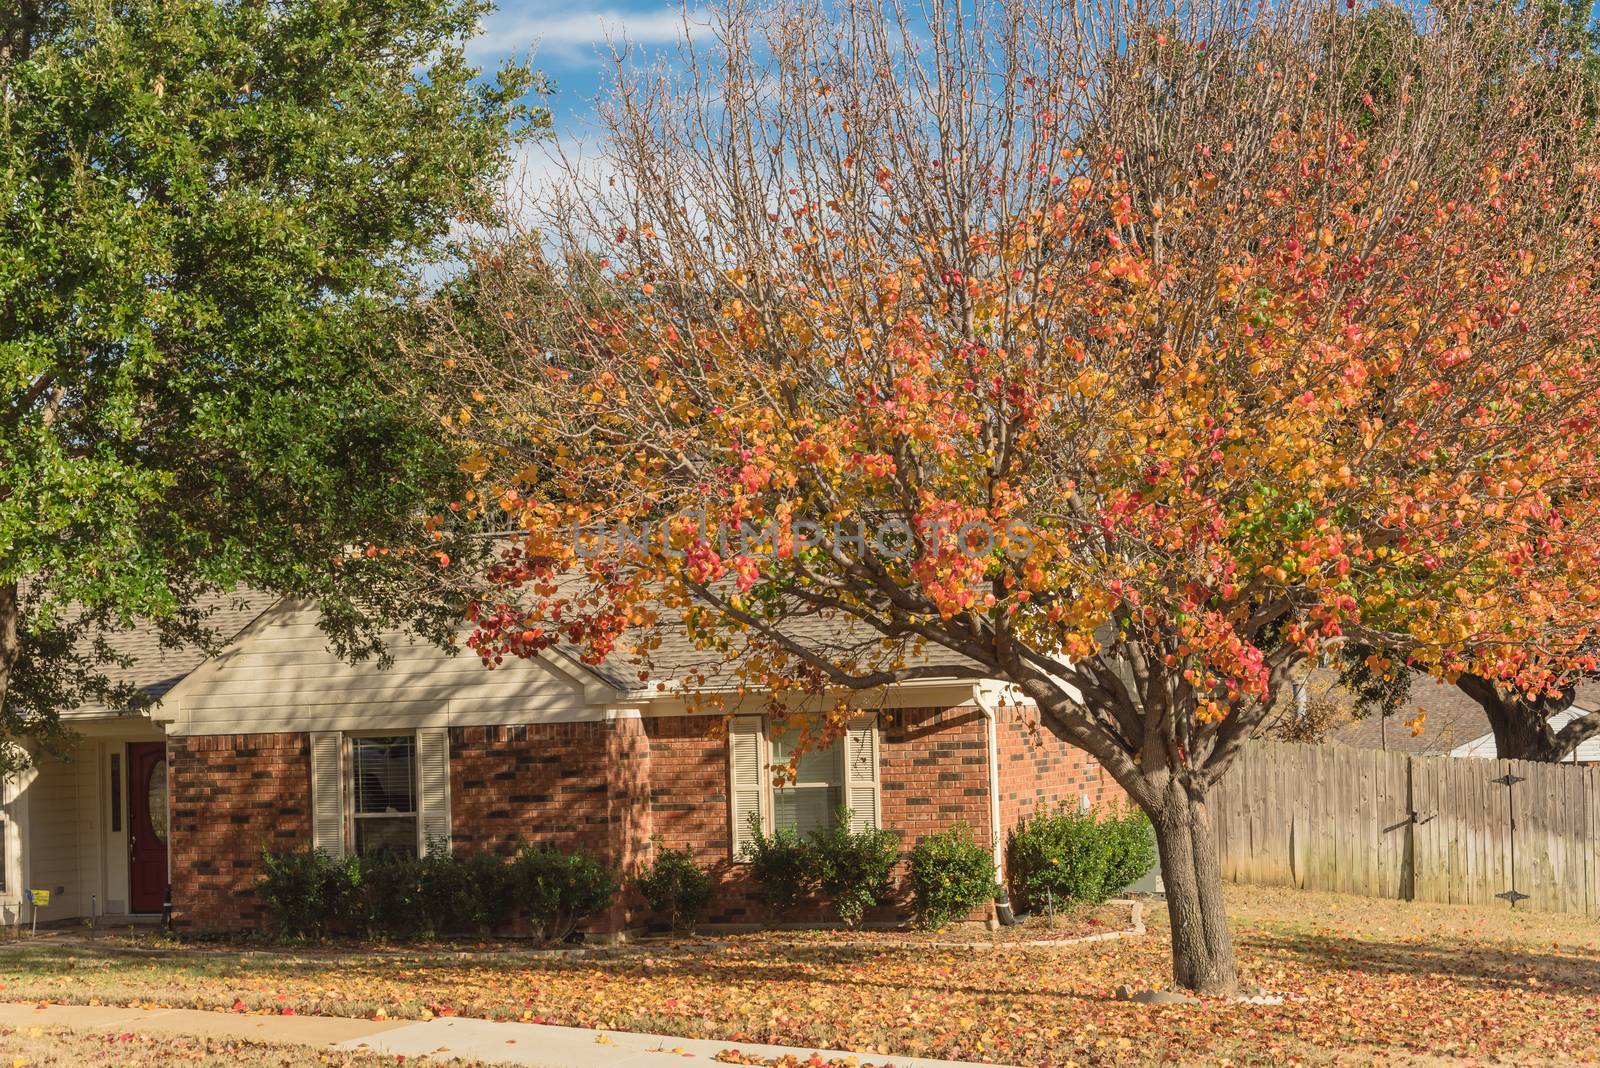 Single story bungalow houses in suburbs of Dallas with bright fall foliage colors by trongnguyen